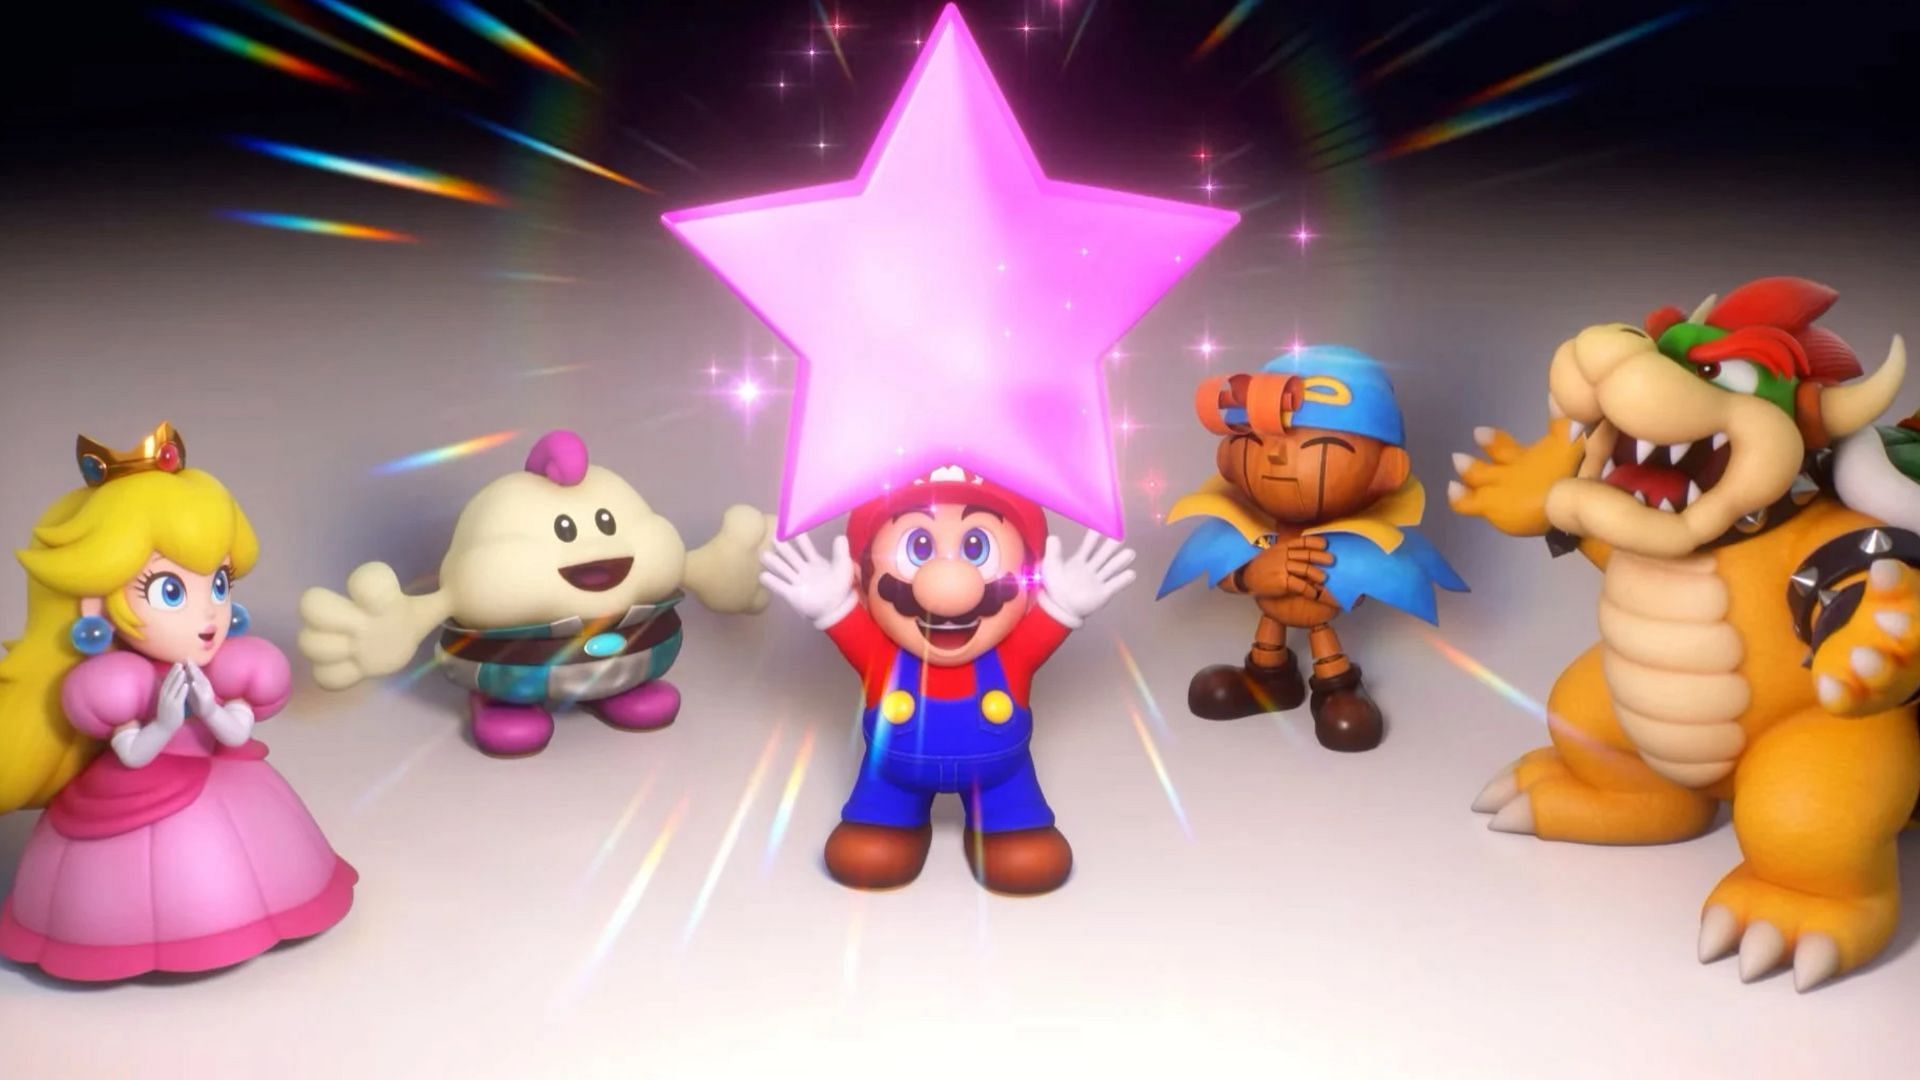 This game features five playable characters (Image via Nintendo)